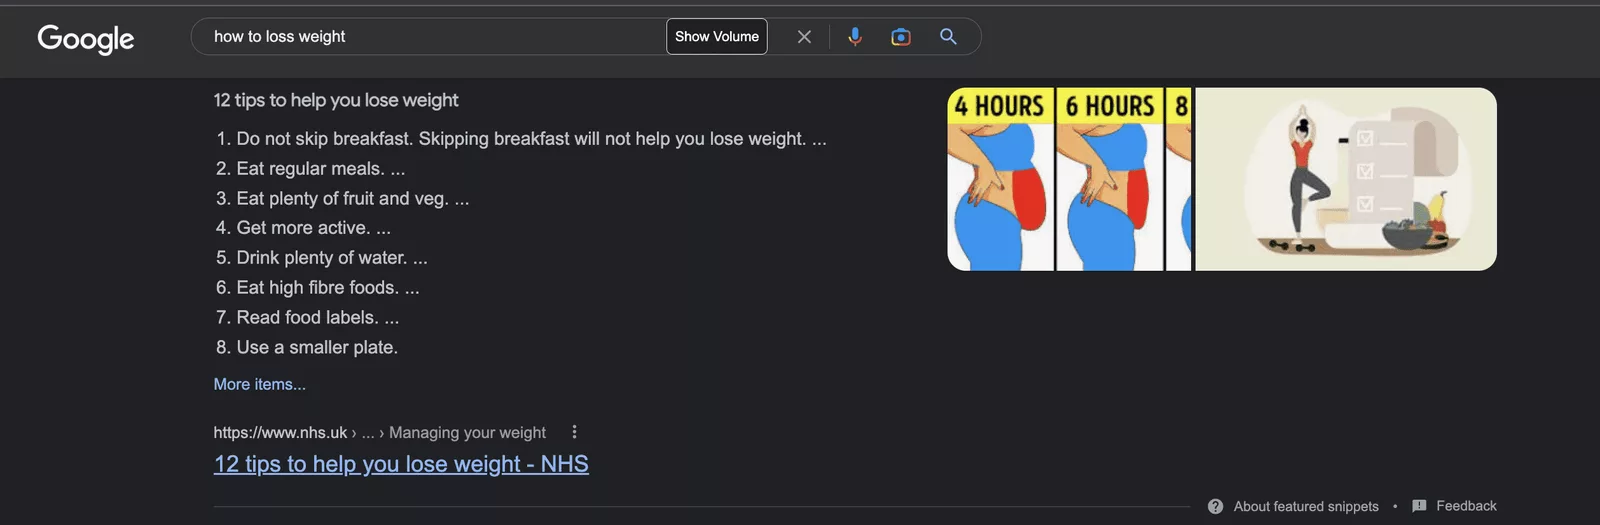 Google Featured Snippets Weight Loss